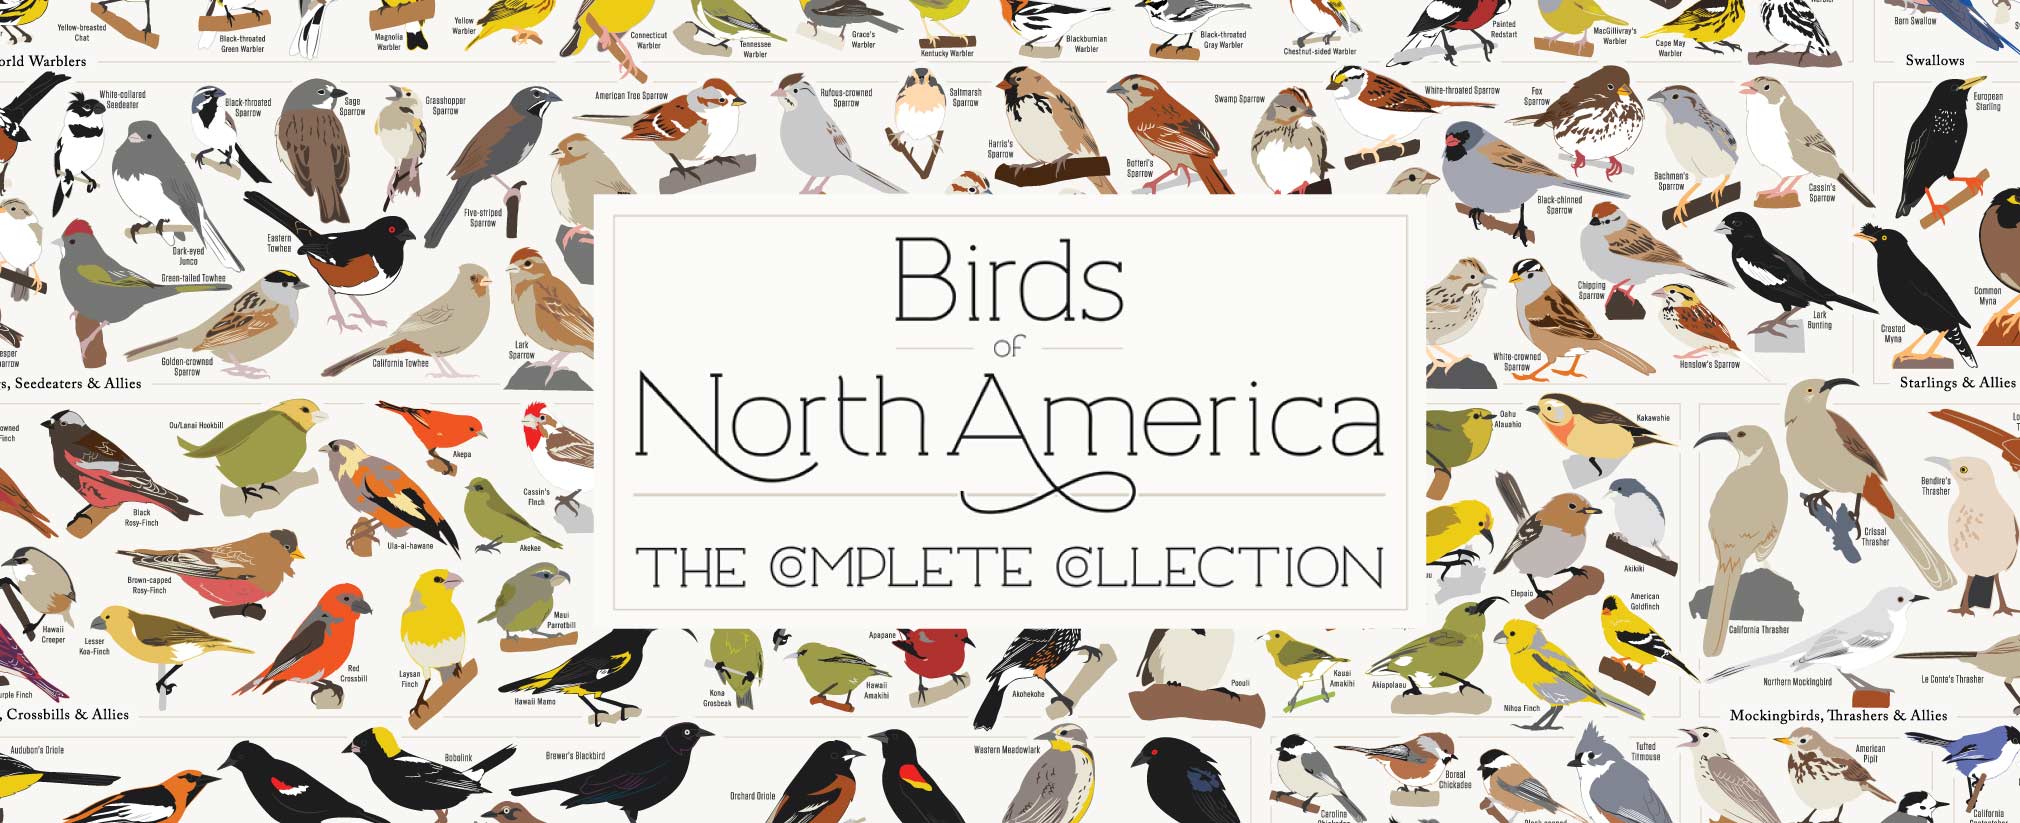 birds-of-north-america-poster-the-complete-collecrtion